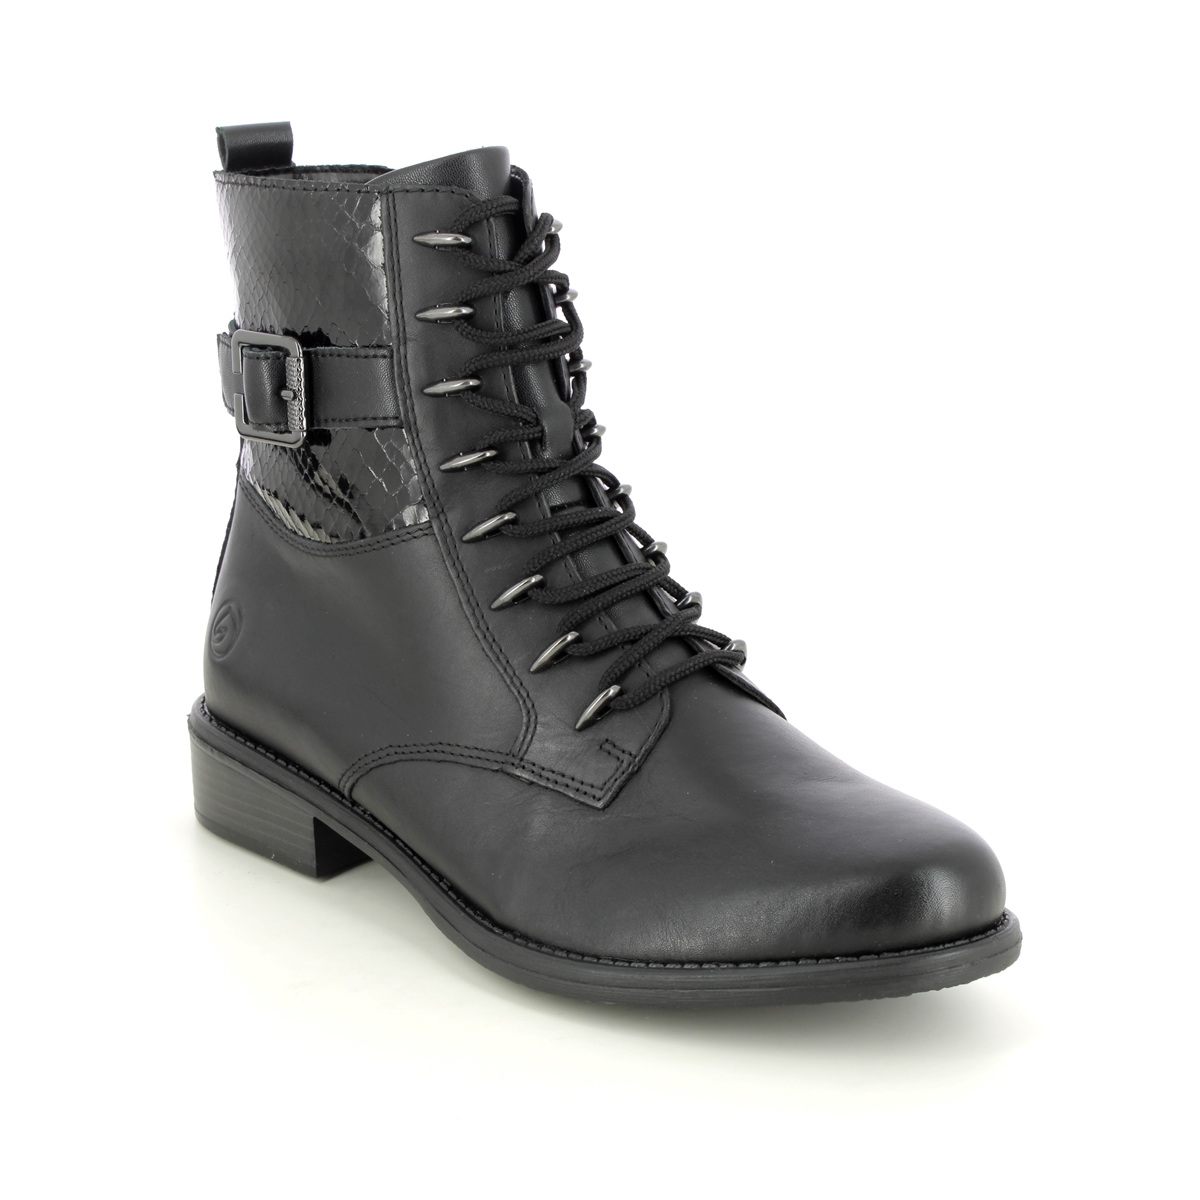 Remonte D0F72-01 Peechlace Black leather Womens Lace Up Boots in a Plain Leather in Size 37